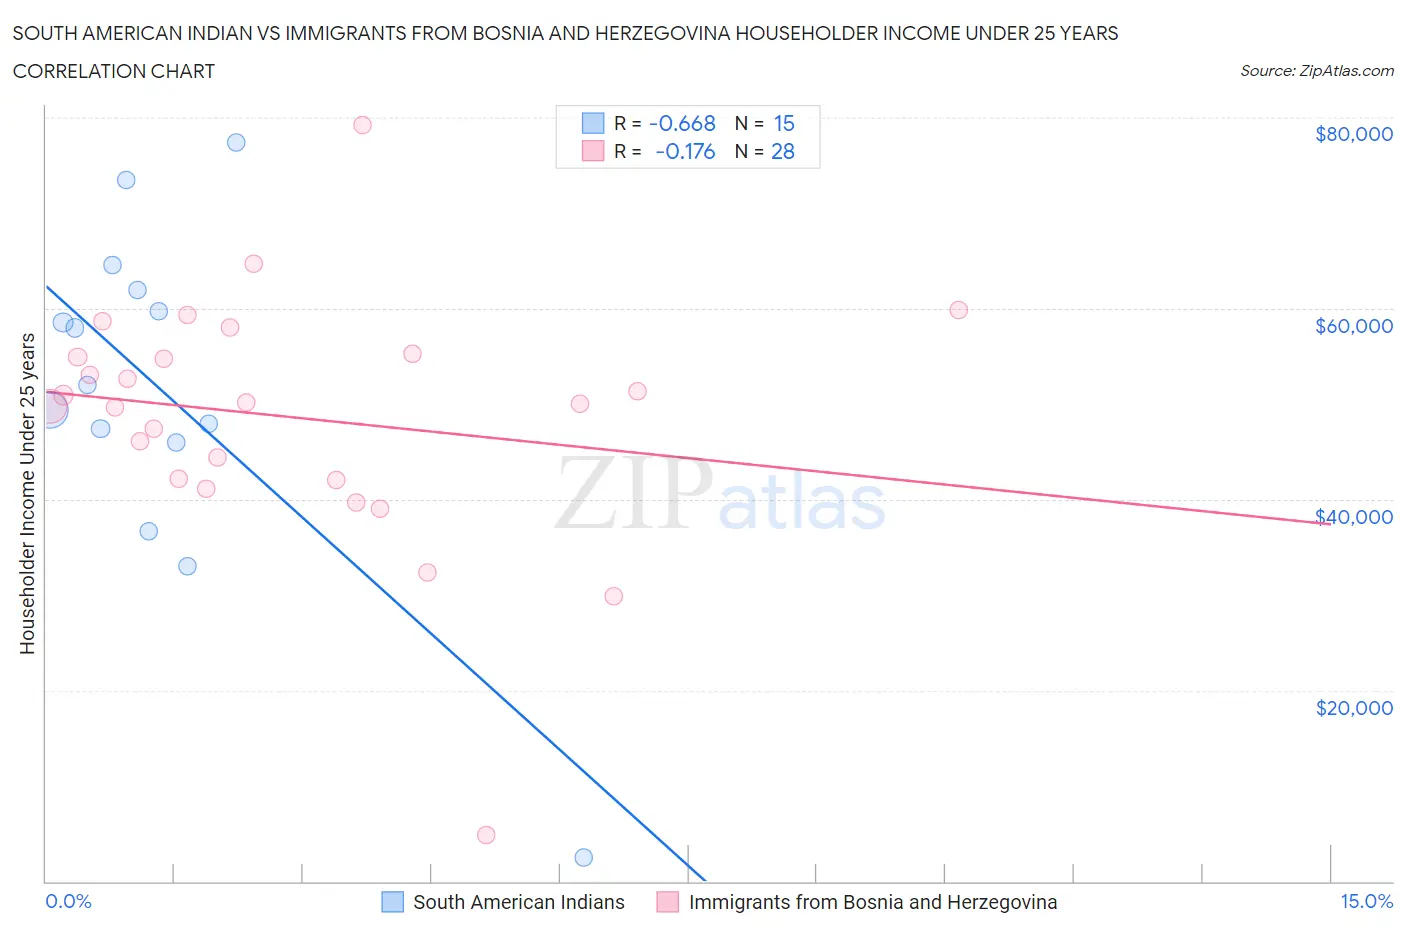 South American Indian vs Immigrants from Bosnia and Herzegovina Householder Income Under 25 years